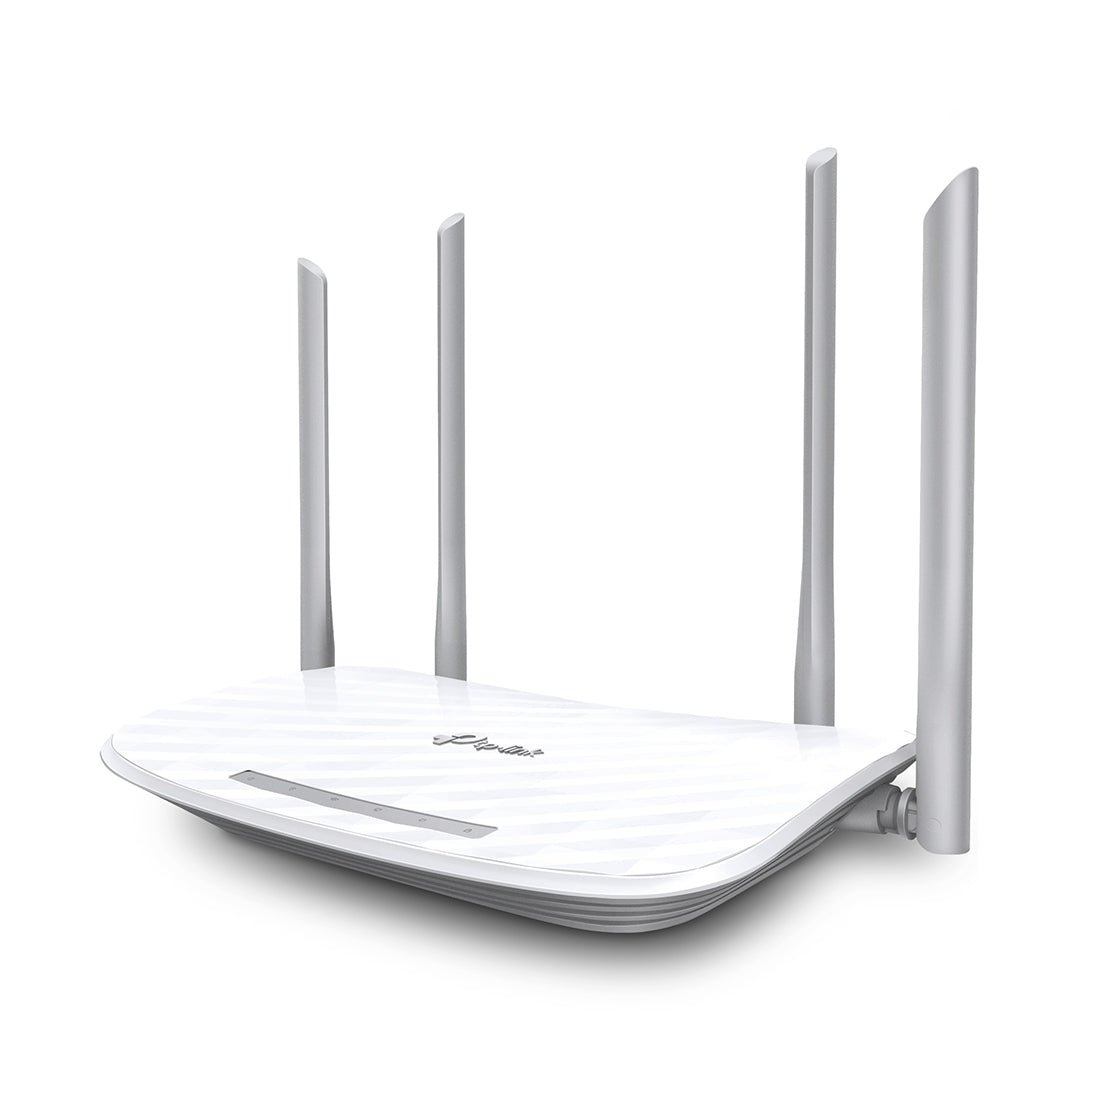 TP-Link Archer C50 Dual Band WiFi Gaming Router - راوتر لاسلكي - Store 974 | ستور ٩٧٤